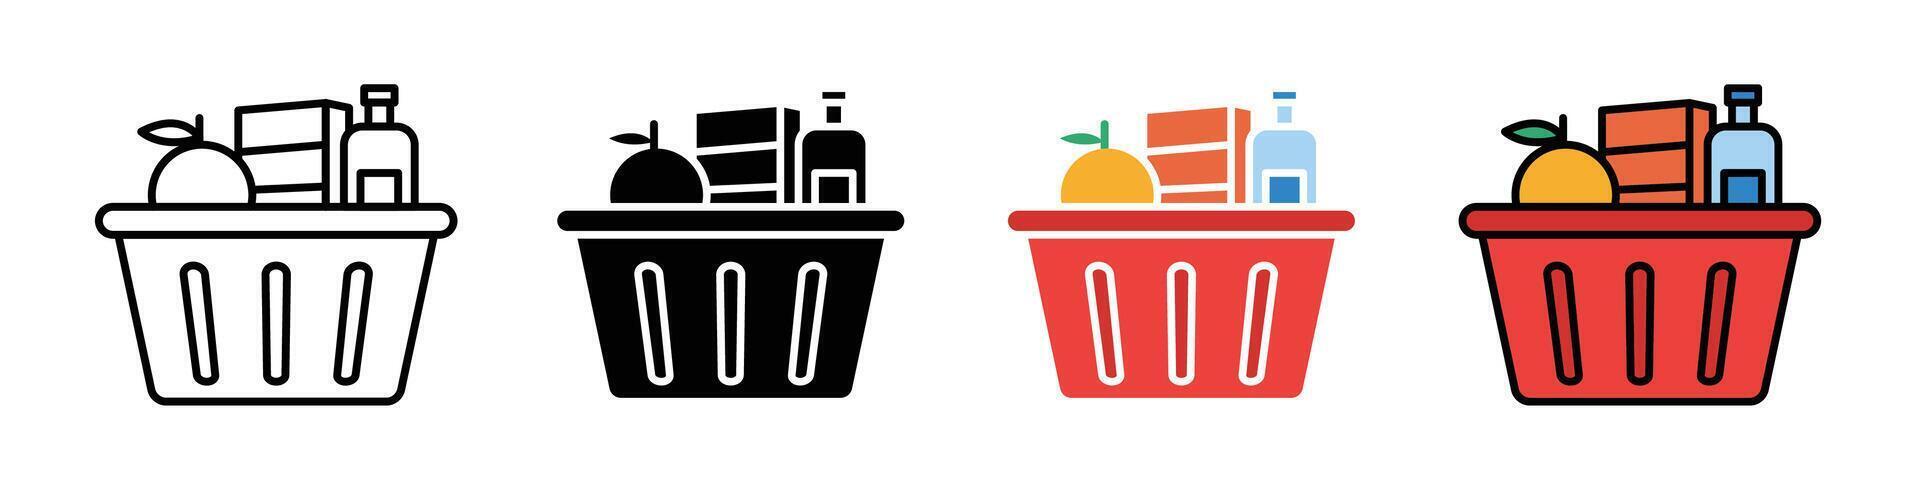 Grocery shopping icon vector